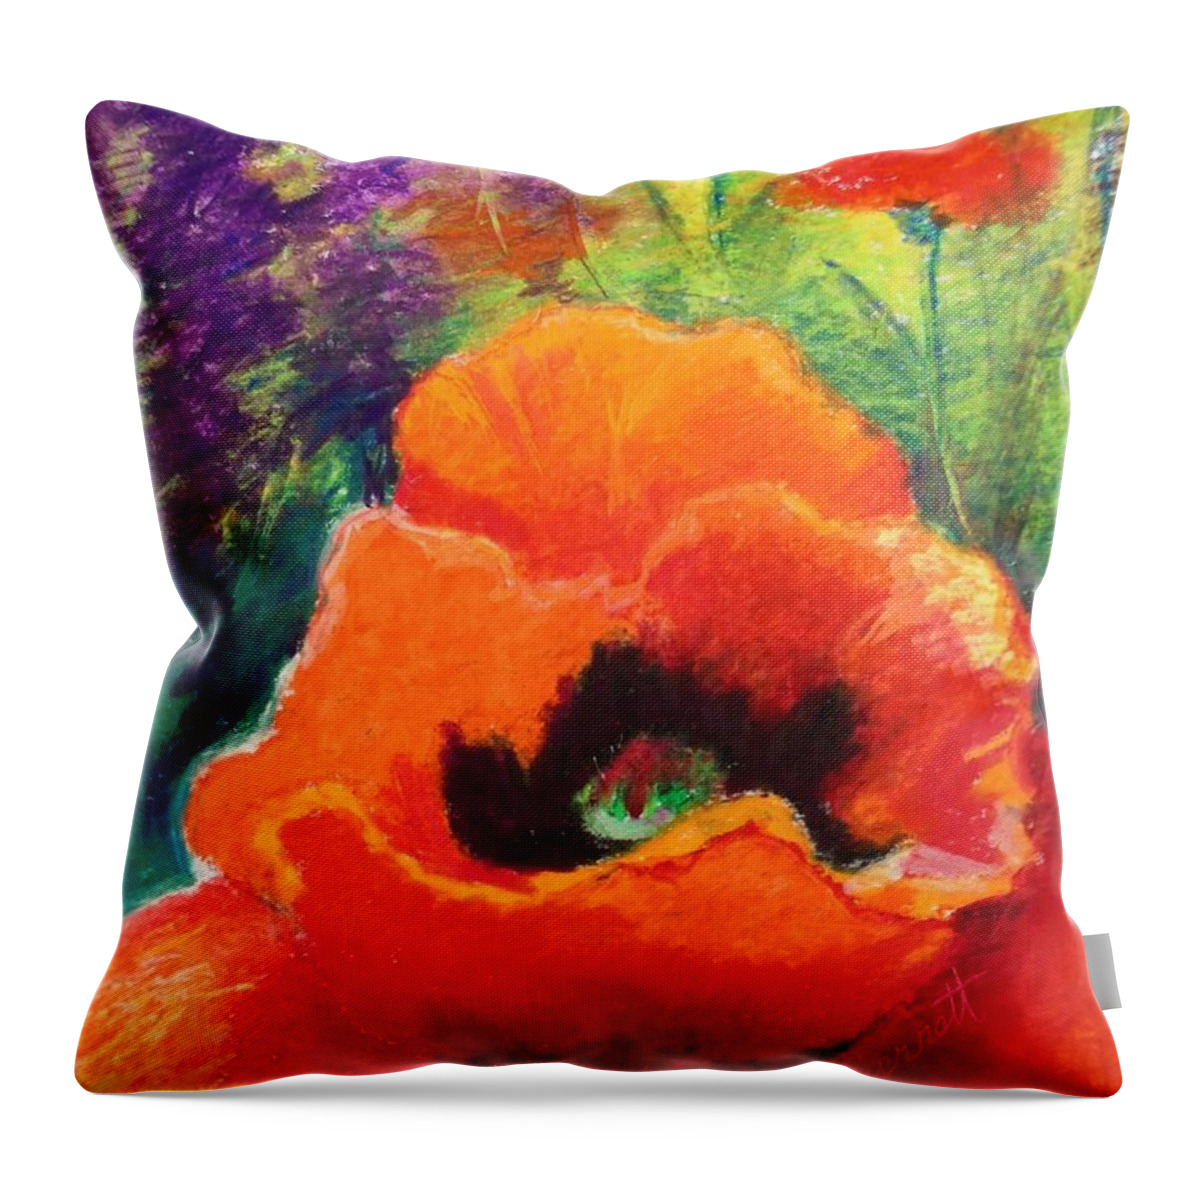 Floral Throw Pillow featuring the painting Red Poppies by Edna Garrett